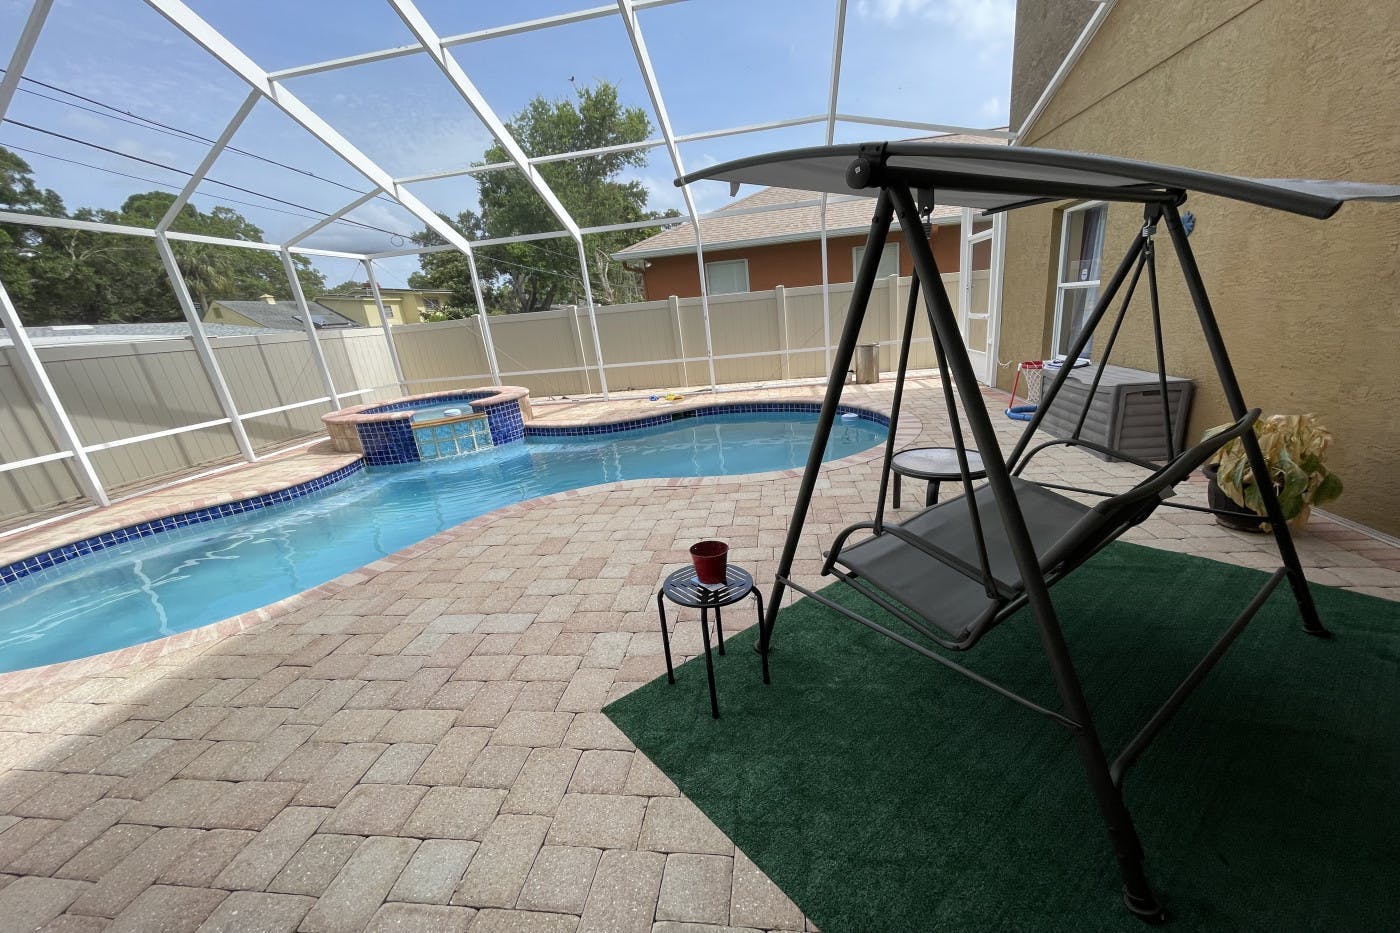 Heated Pool & Hot-tub 5 minutes from St.Pete beach